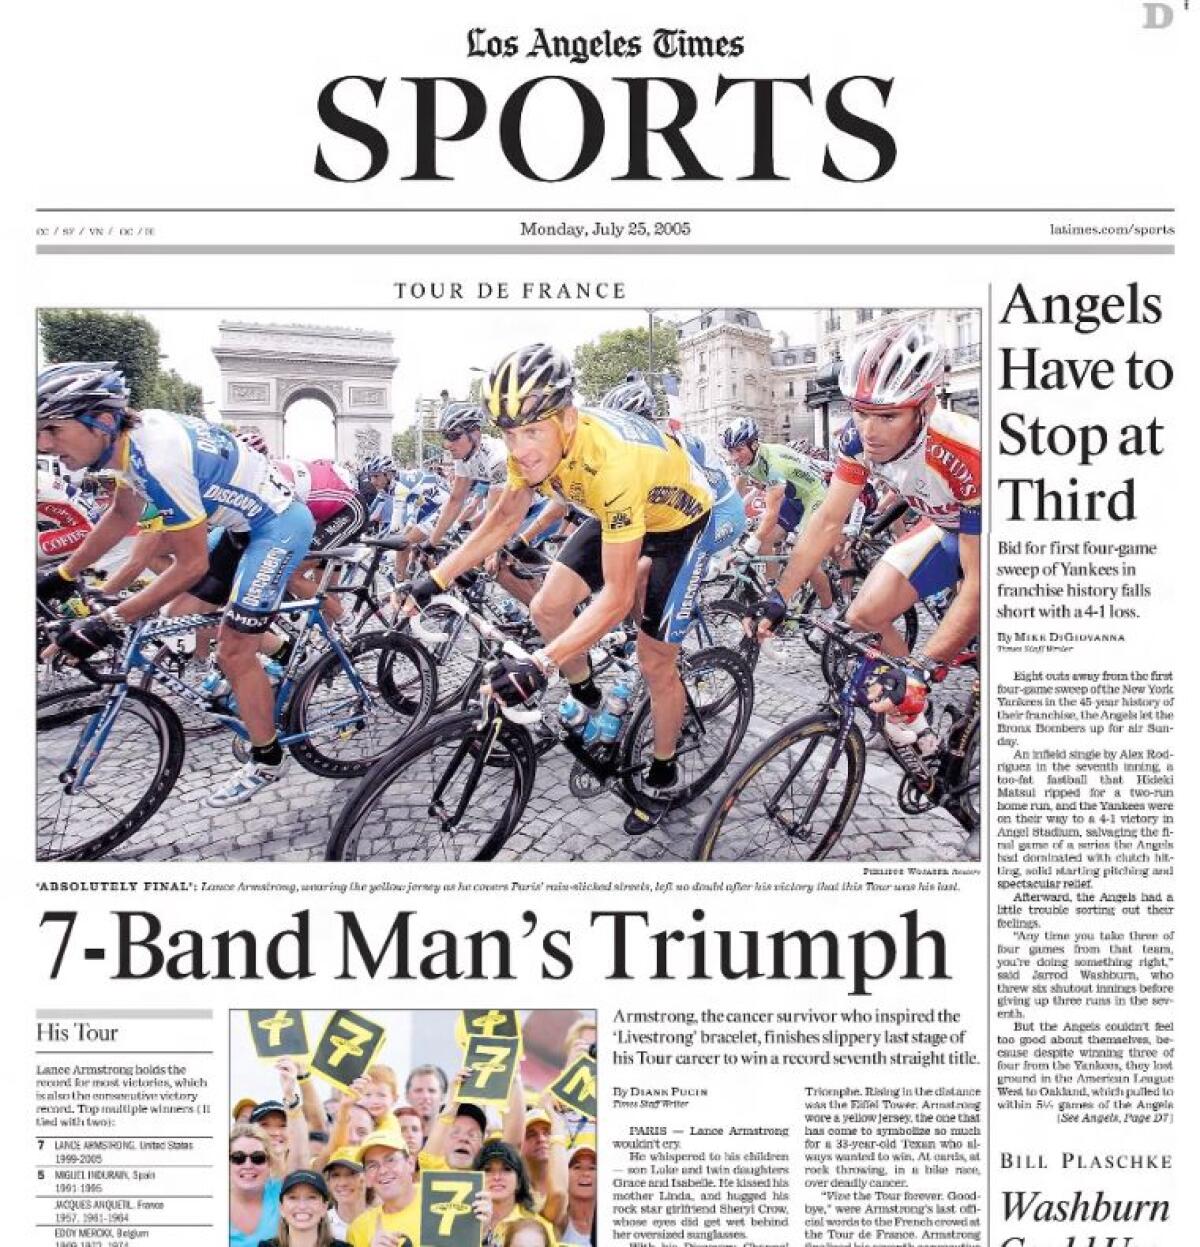 A Sports page shows articles and a big photo of cyclists.